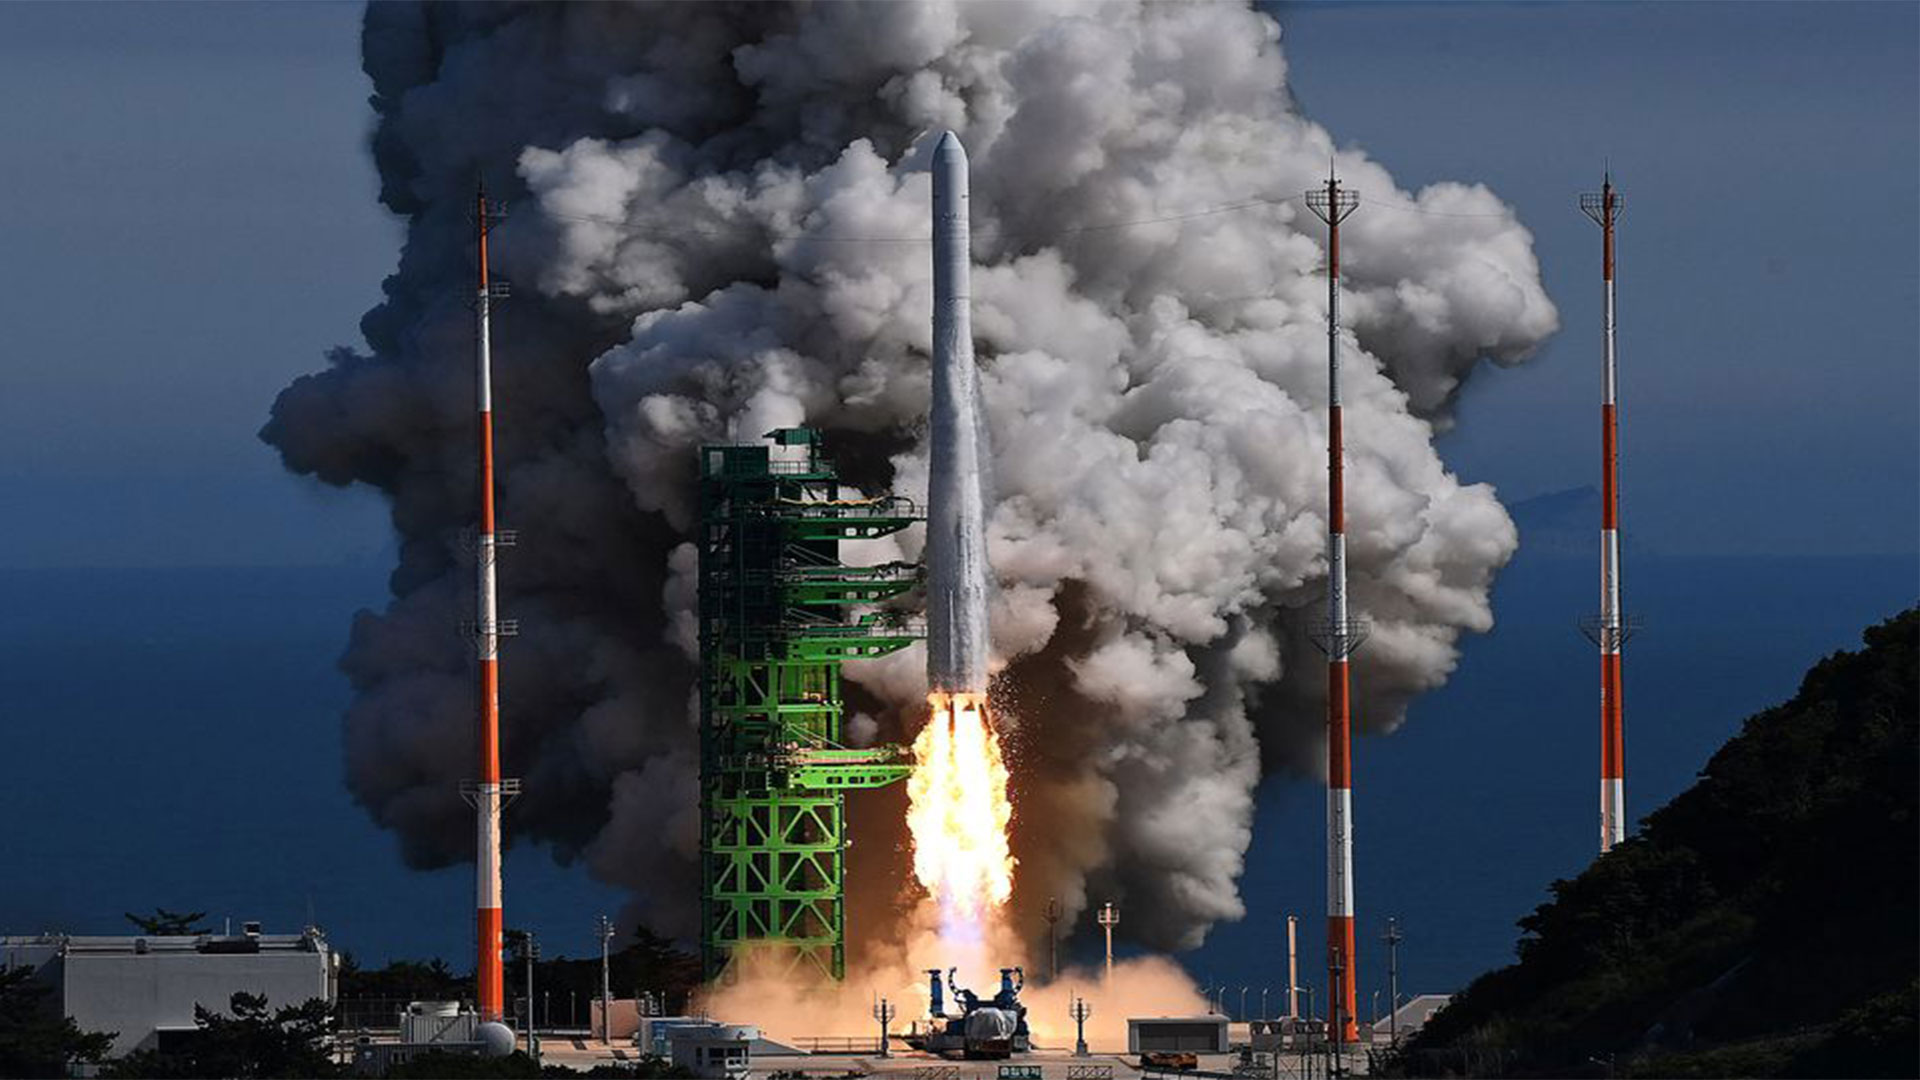  South Korea’s domestically produced Nuri space rocket lifts off from its launch pad at the Naro Space Center in Goheung County, South Korea, June 21, 2022. Mandatory credit Korea Pool/Yonhap via REUTERS